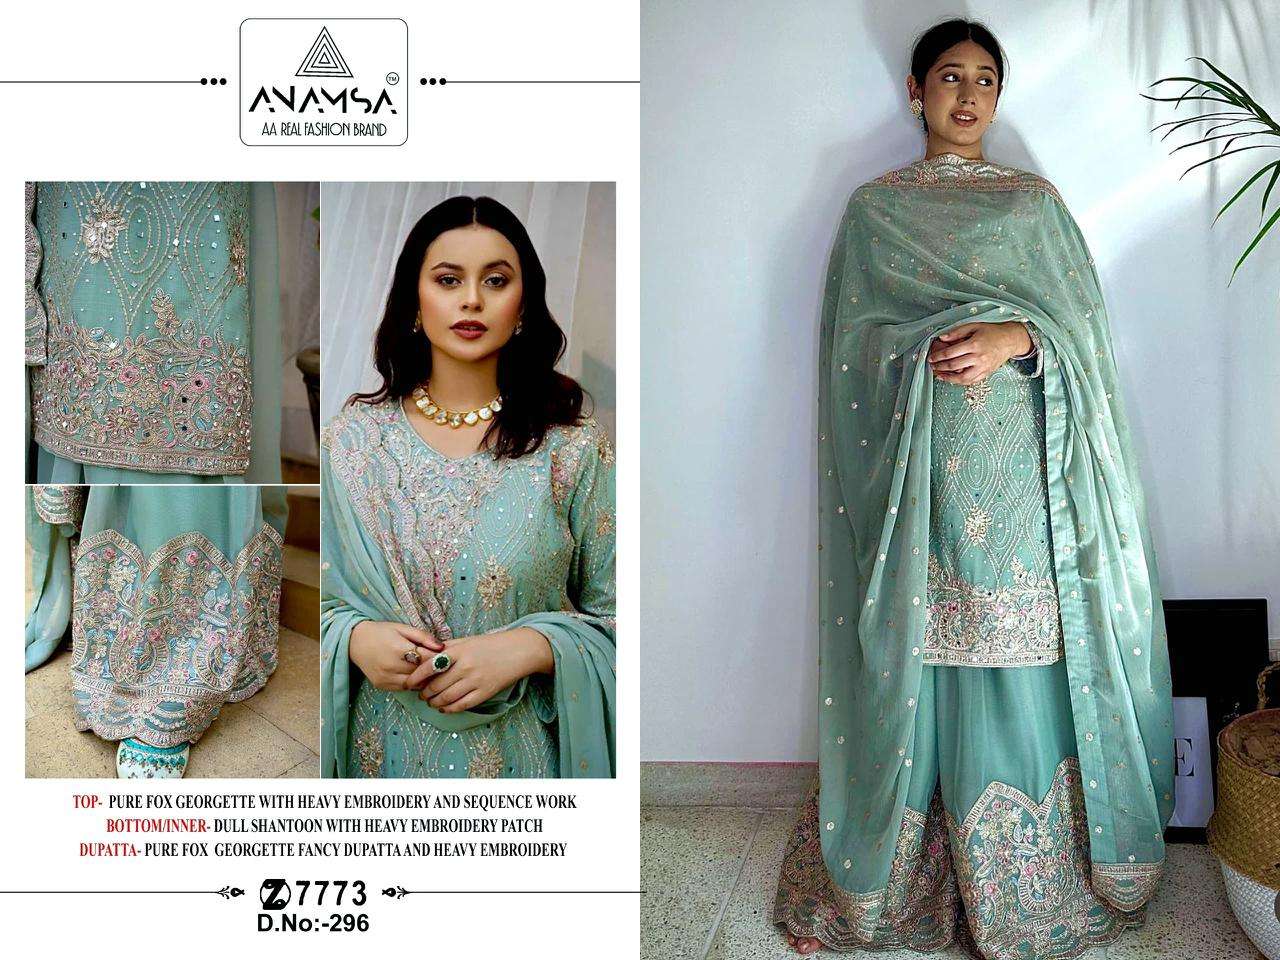 Anamsa 296 georgette with embroidery work sky blue shades pakistani salwar kameez collection at best wholesale rate 